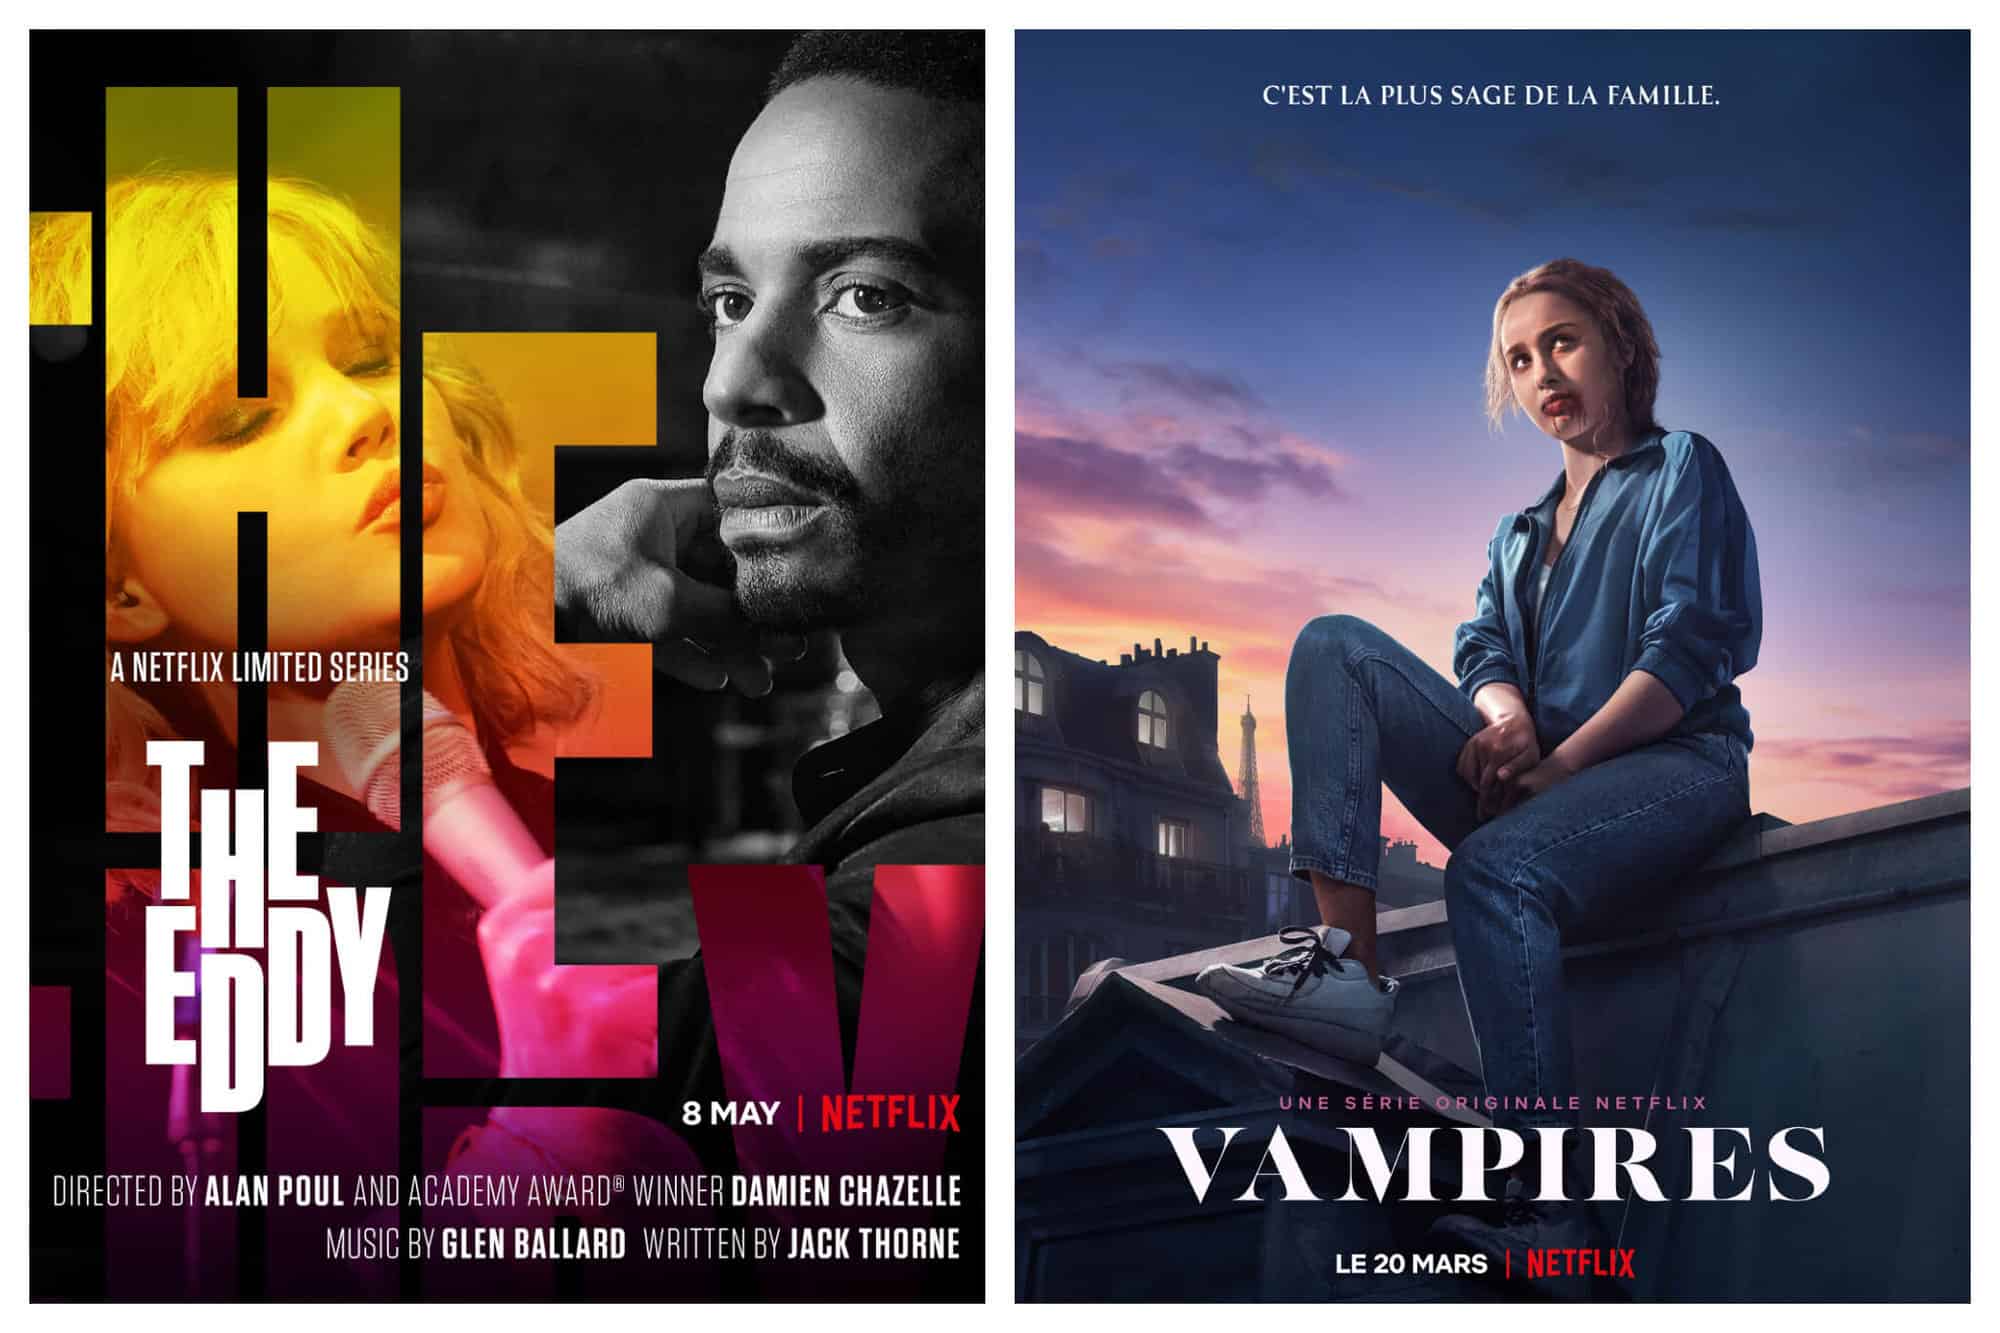 Left: ad for "The Eddy" Netflix series. Behind the name of the series in yellow and pink letter is a woman with her eyes closed. There is a man in black and white next to her on the right. Right: ad for "Vampires" Netflix series. There is a woman to the right sitting on top of a Parisian roof with blood at the corners of her mouth as she looks into the distance. The Eiffel Tower is visible to the left.